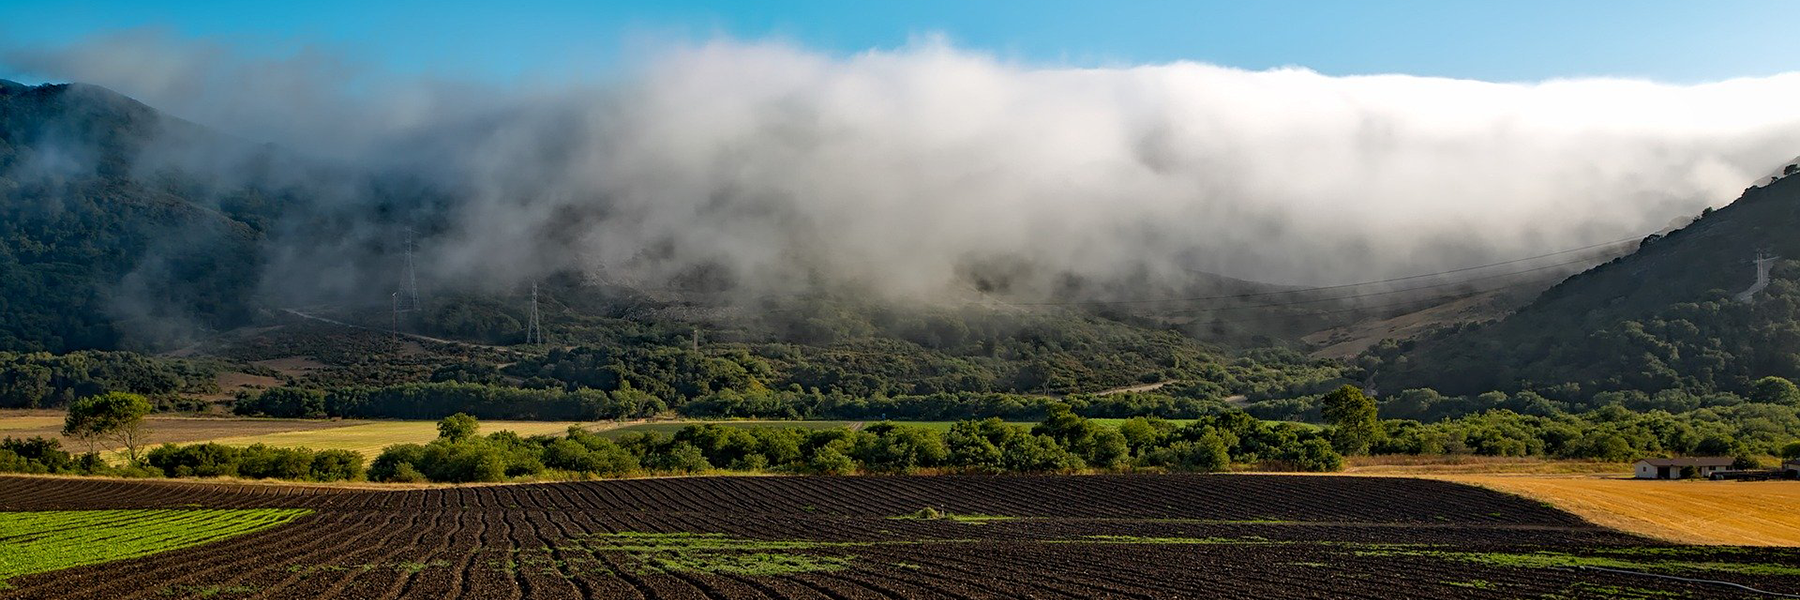 Many of the country’s fruits and vegetables are grown in the Central Valley of California. Better winter climate forecasts can help water managers and farmers plan accordingly (Image by David Mark from Pixabay).